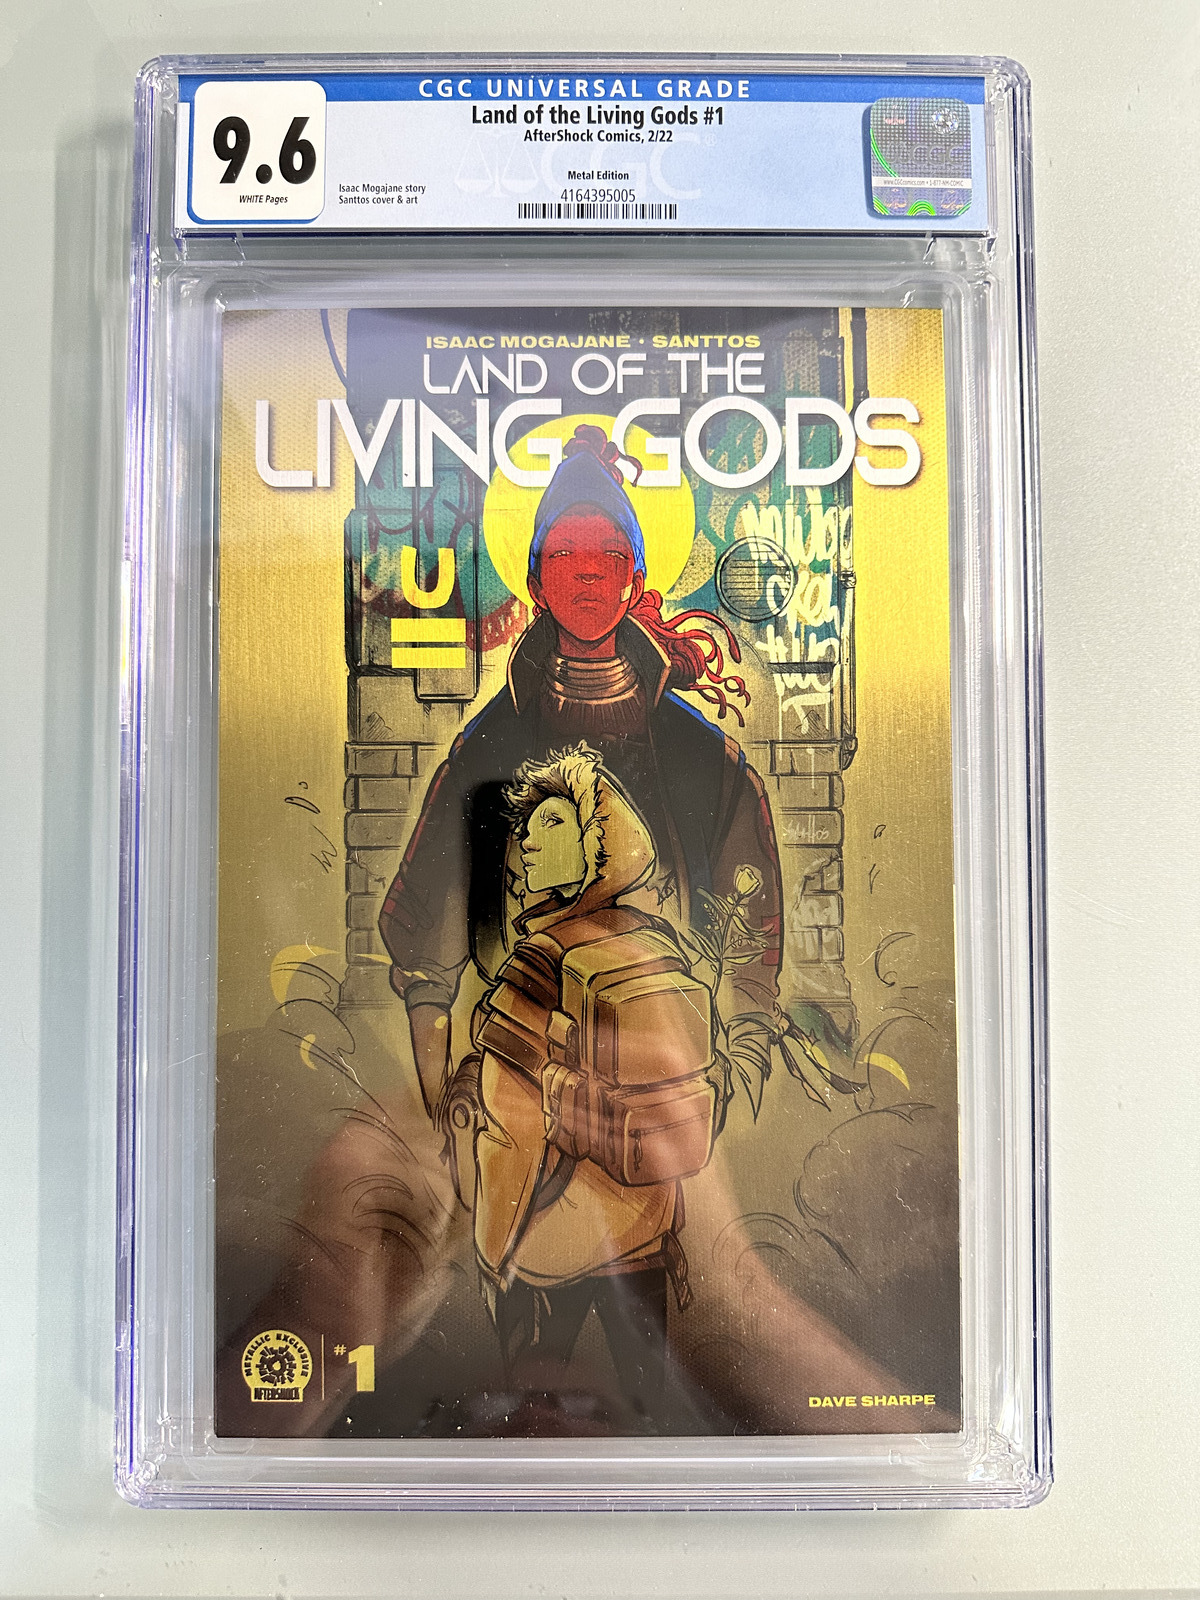 LAND OF THE LIVING GODS #1 EXCLUSIVE METAL EDITION VARIANT CGC 9.6